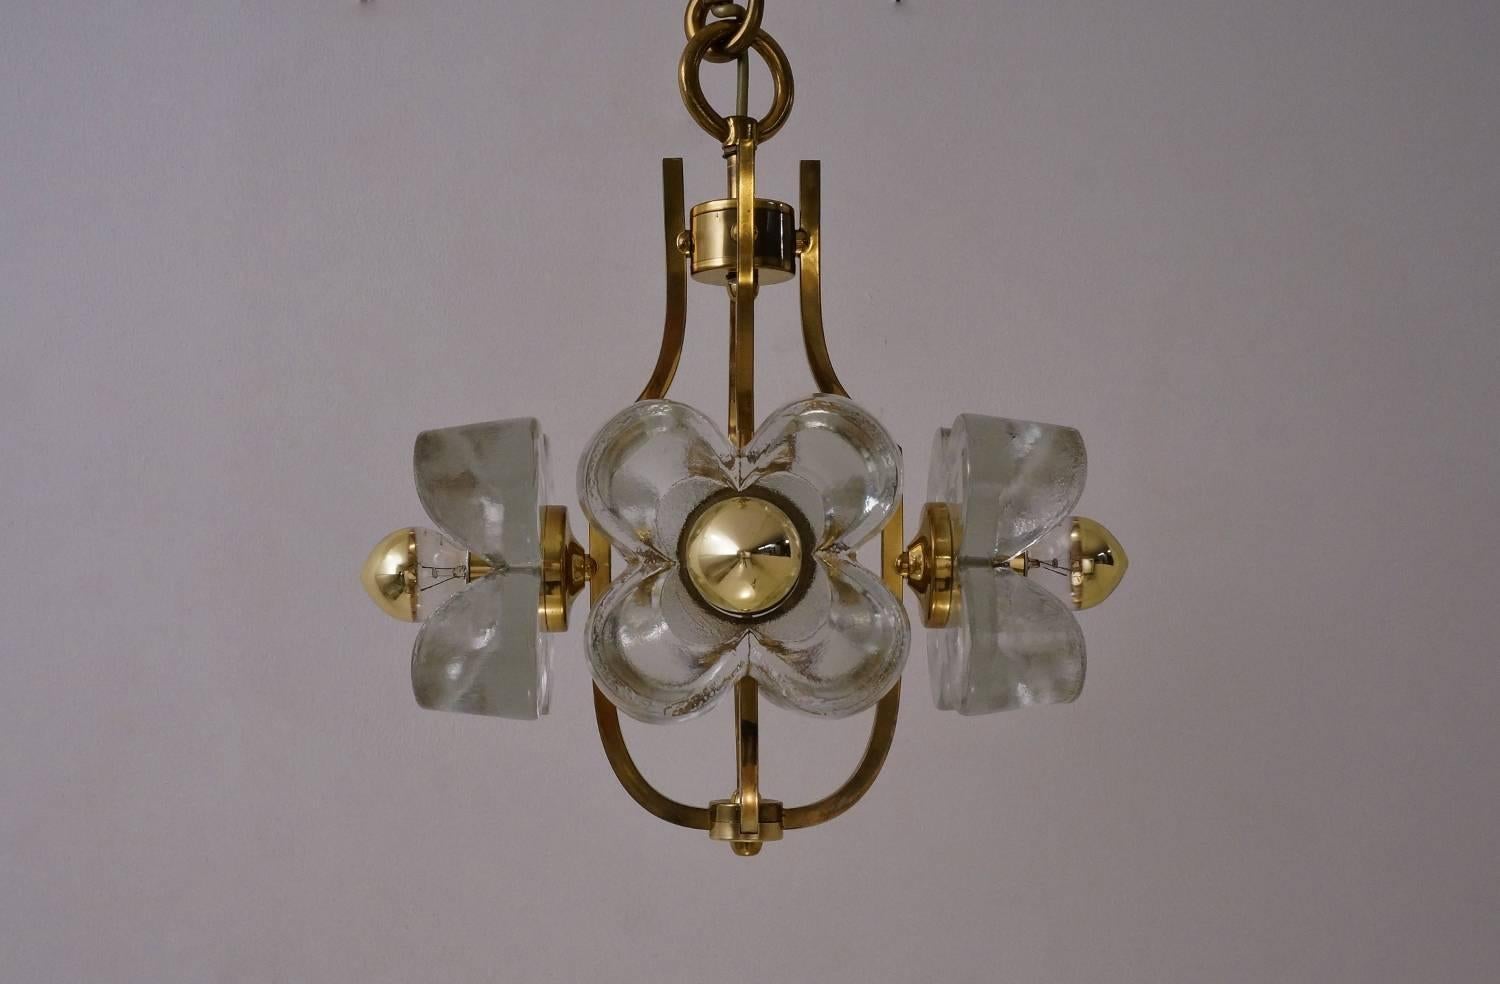 Often attributed to Kalmar Lighting this flower chandelier is by Sische Lighting of Germany.

This chandelier has been thoroughly cleaned respecting the vintage patina. It is newly rewired with gold cable which is earthed. It is in full working